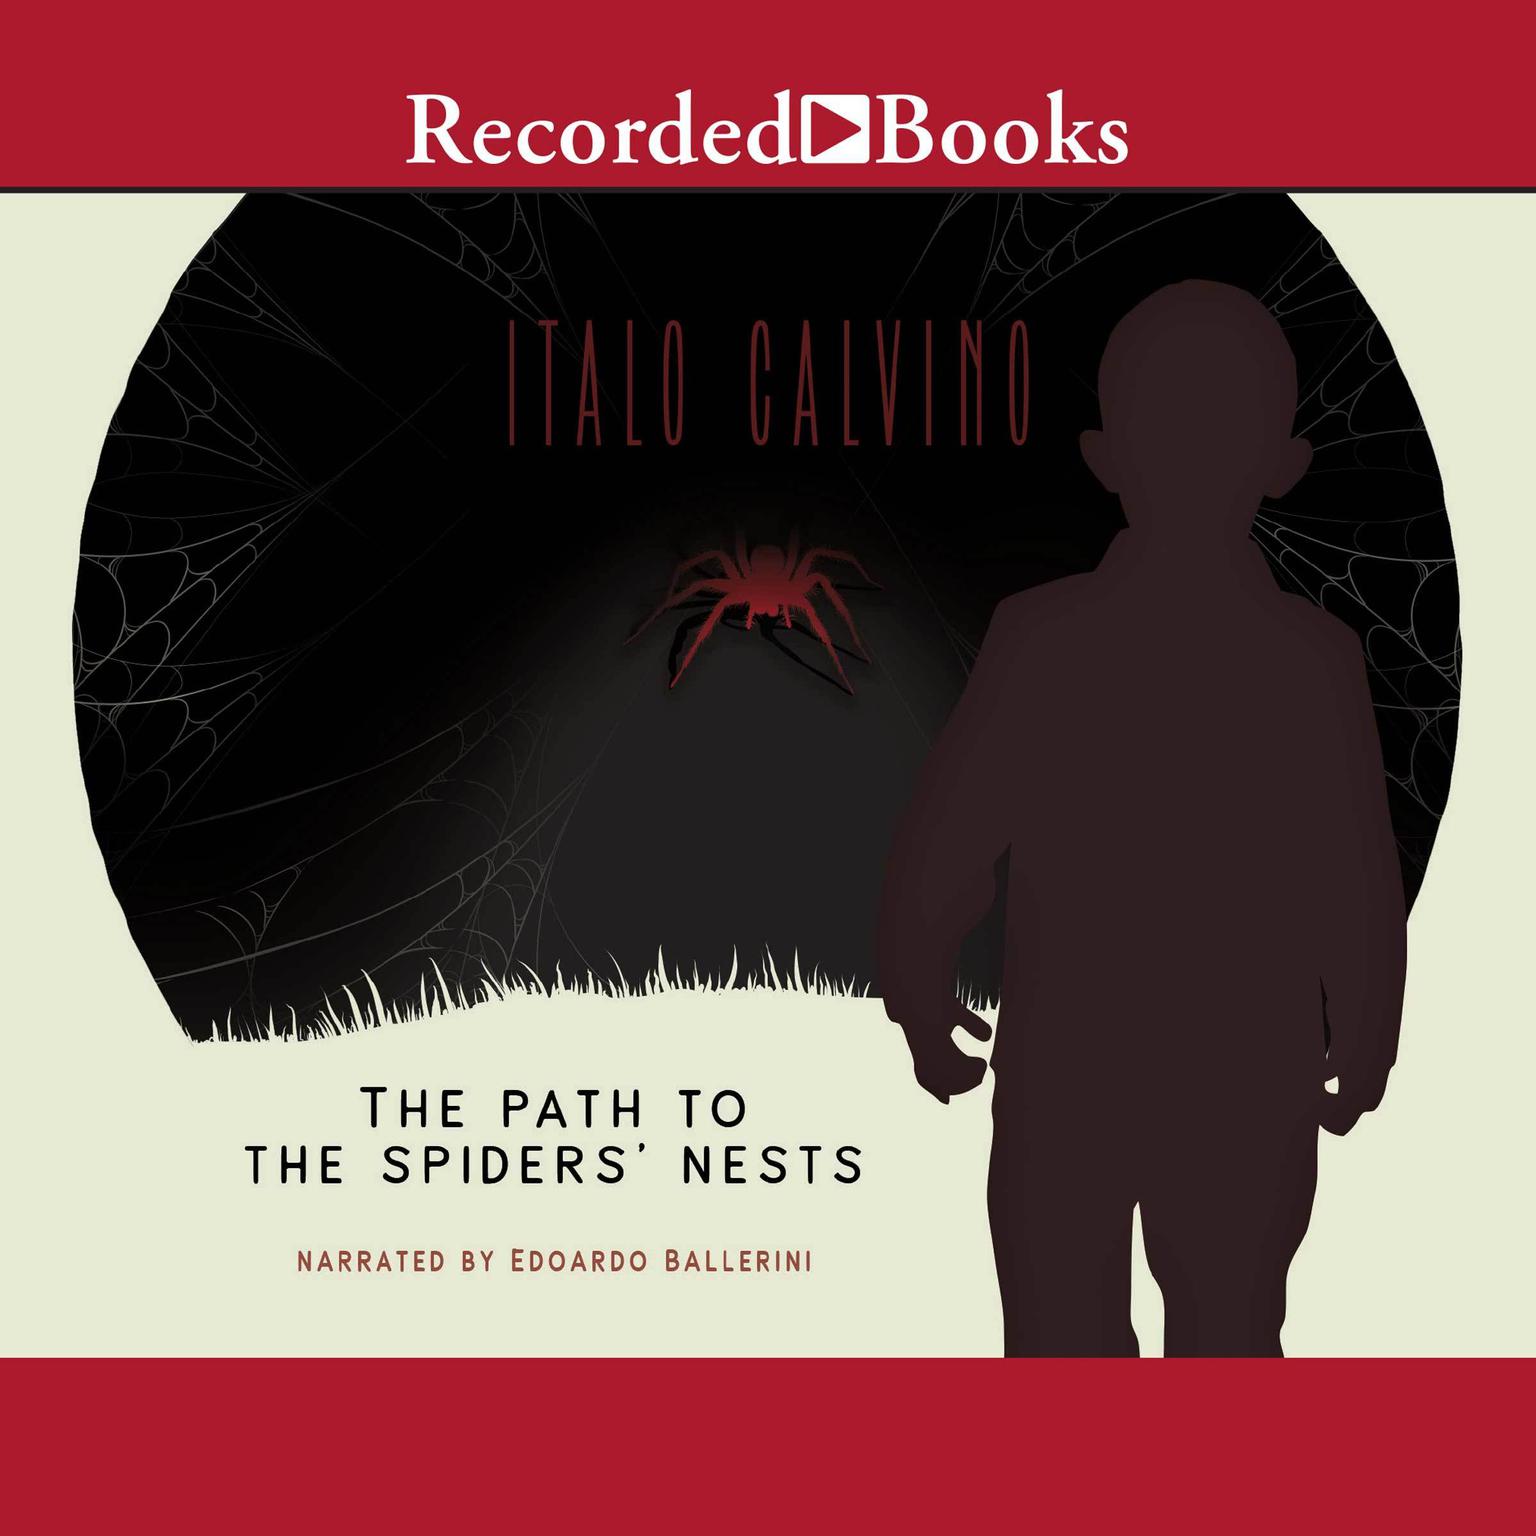 The Path to the Spiders Nests Audiobook, by Italo Calvino